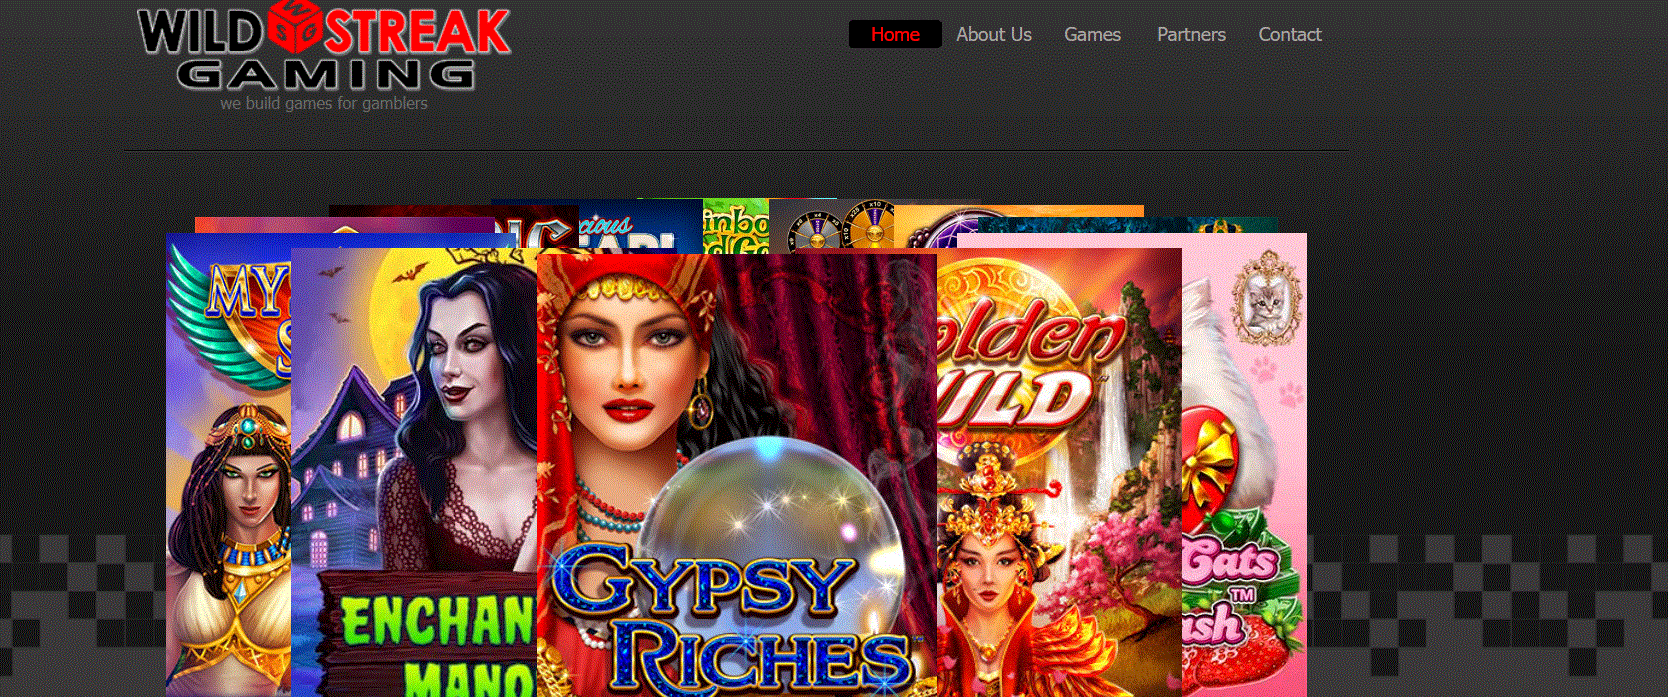 Gypsy Riches by Wild Streak Gaming » Review + Demo Game